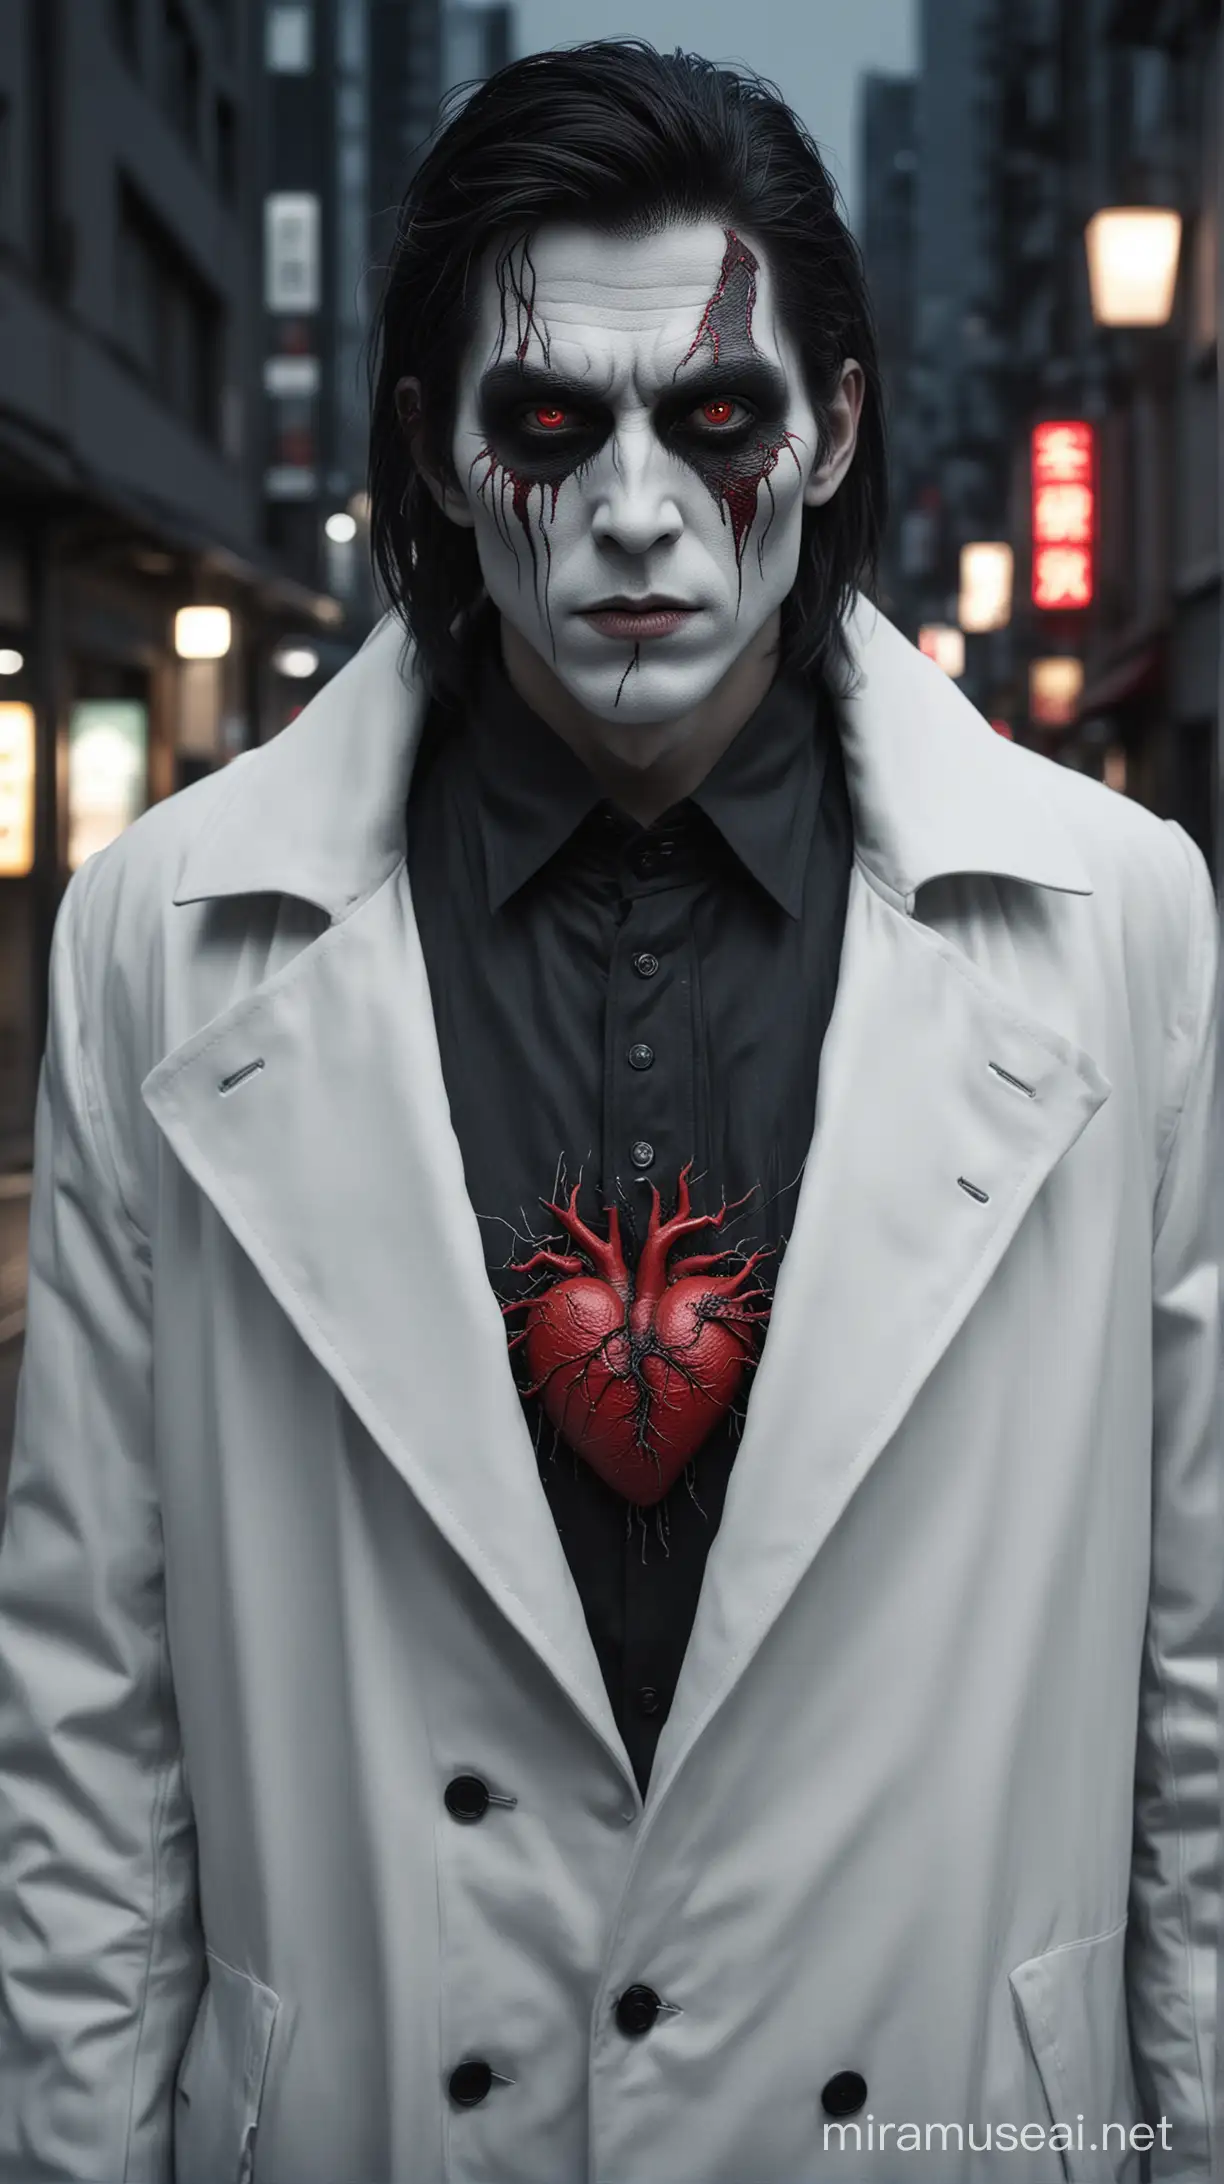 a slightly visible haunting spirit of male attractive Ghoul, ghoul is dressed in white-grey coat and black costume with pallid skin and sunken eyes and long dark hair, with red realistic human heart in the chest, night tokyo empty streets are on background, dark style, hyper-realistic, photo-realistic